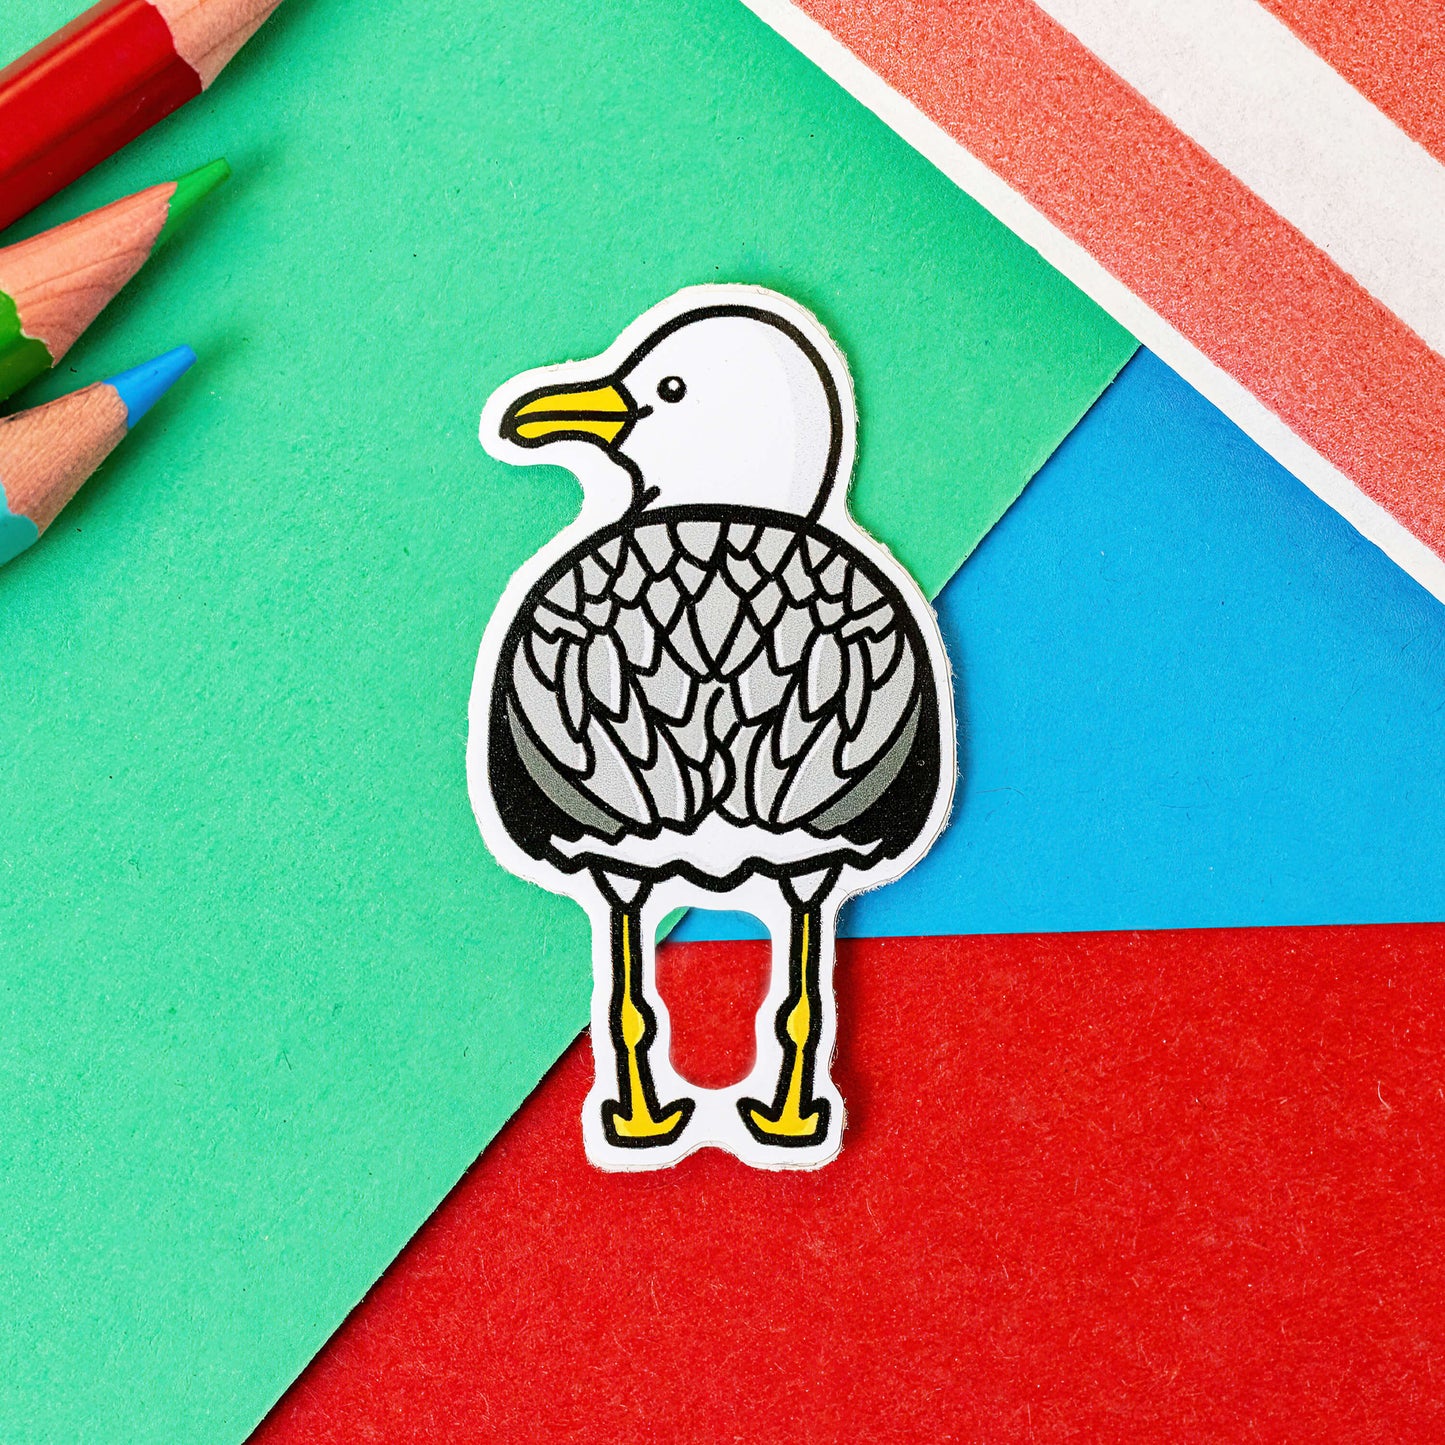 The Seagull Bum Sticker on a red, blue and green background with colouring pencils and red stripe candy bag. The seagull shape vinyl sticker is facing away showing off its bum smiling looking over its shoulder. 